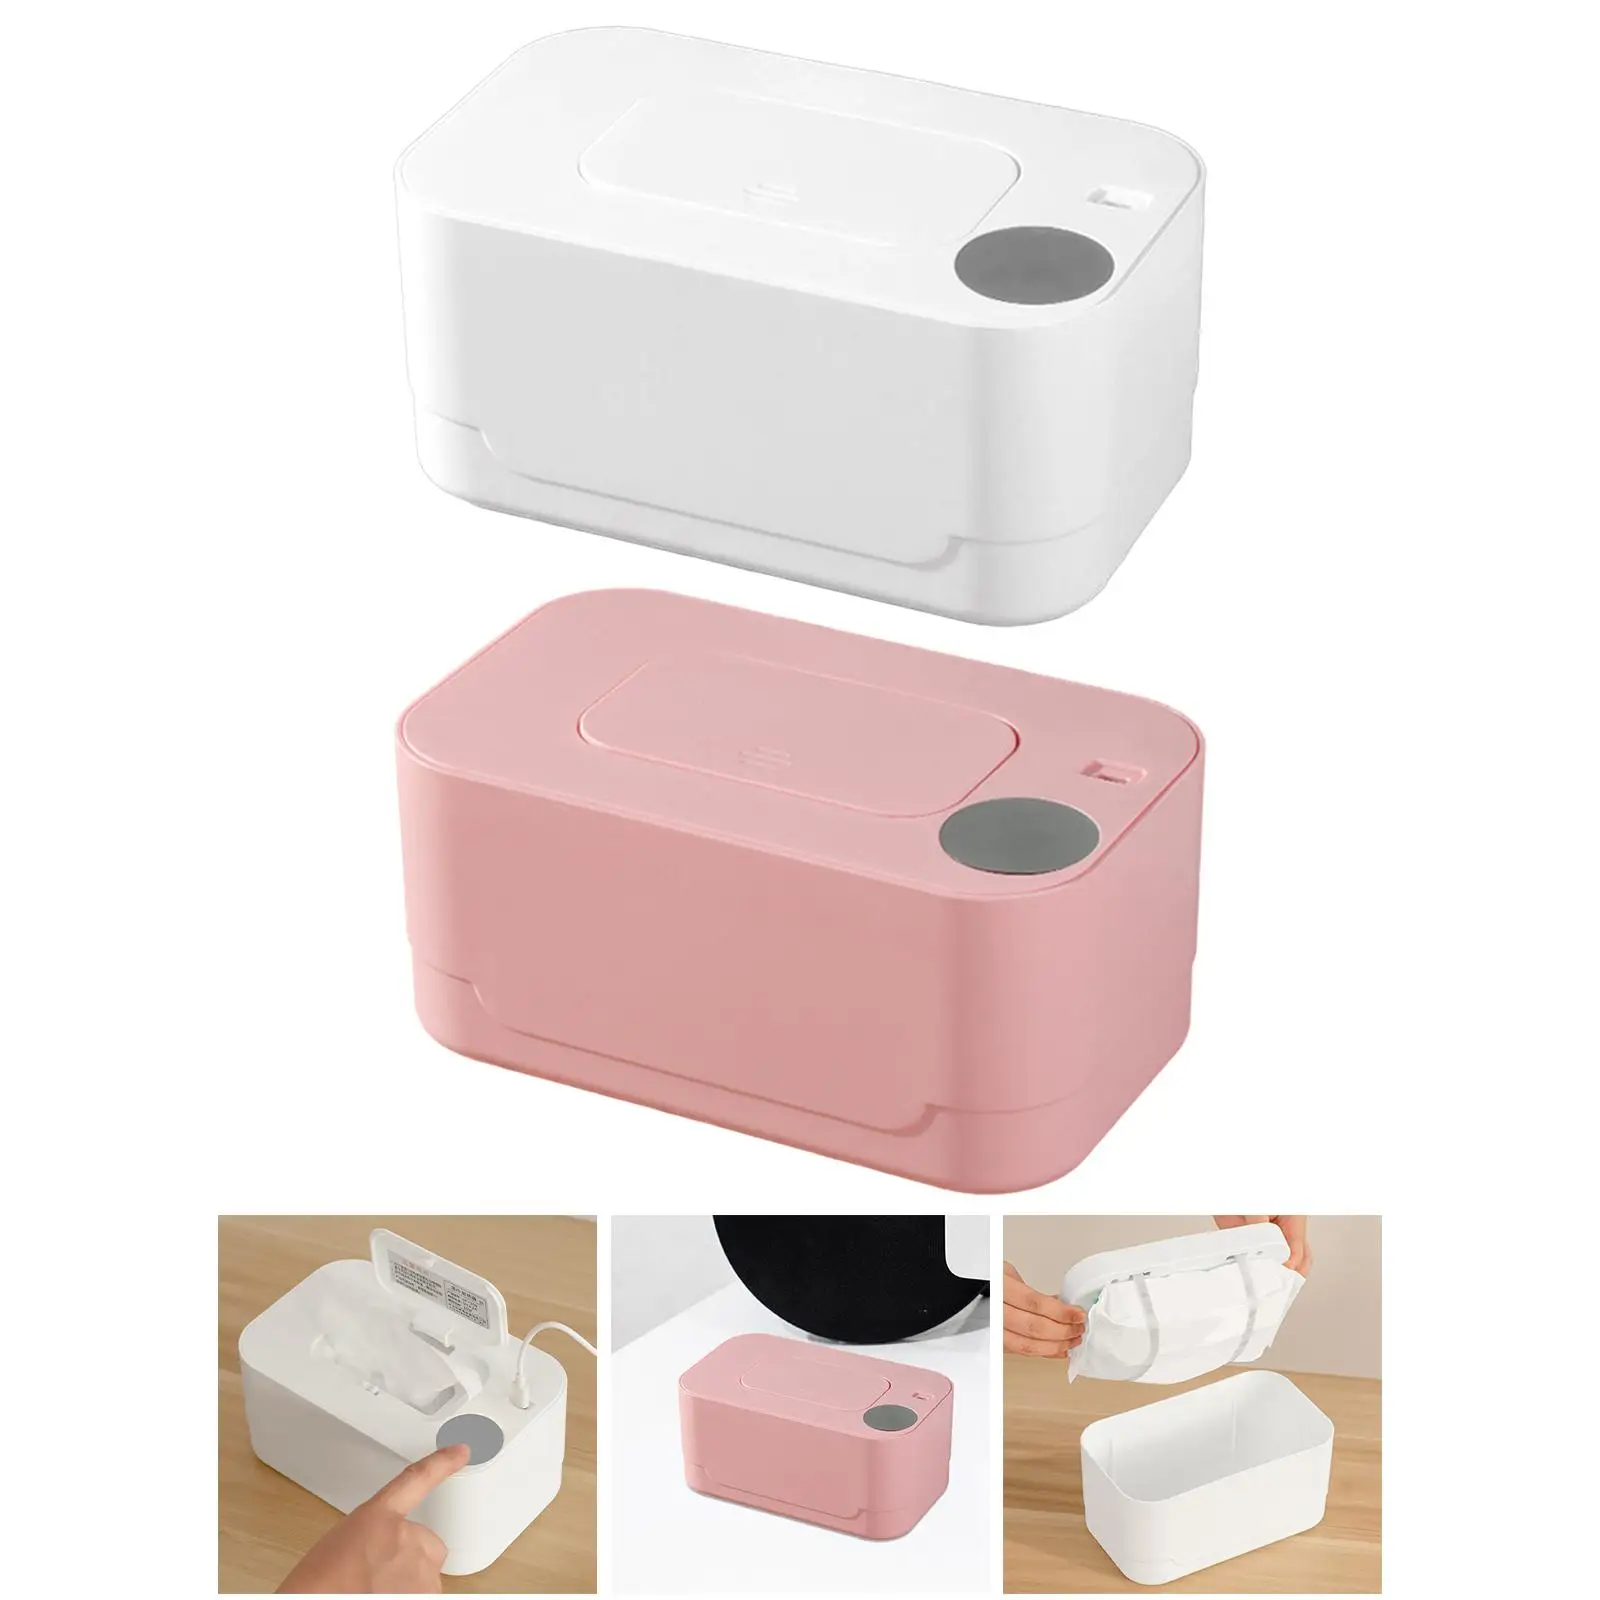 Wipe Warmer Large Capacity Silence Reusable with Digital Display Portable for Household Wet Tissue Car Outdoor Traveling